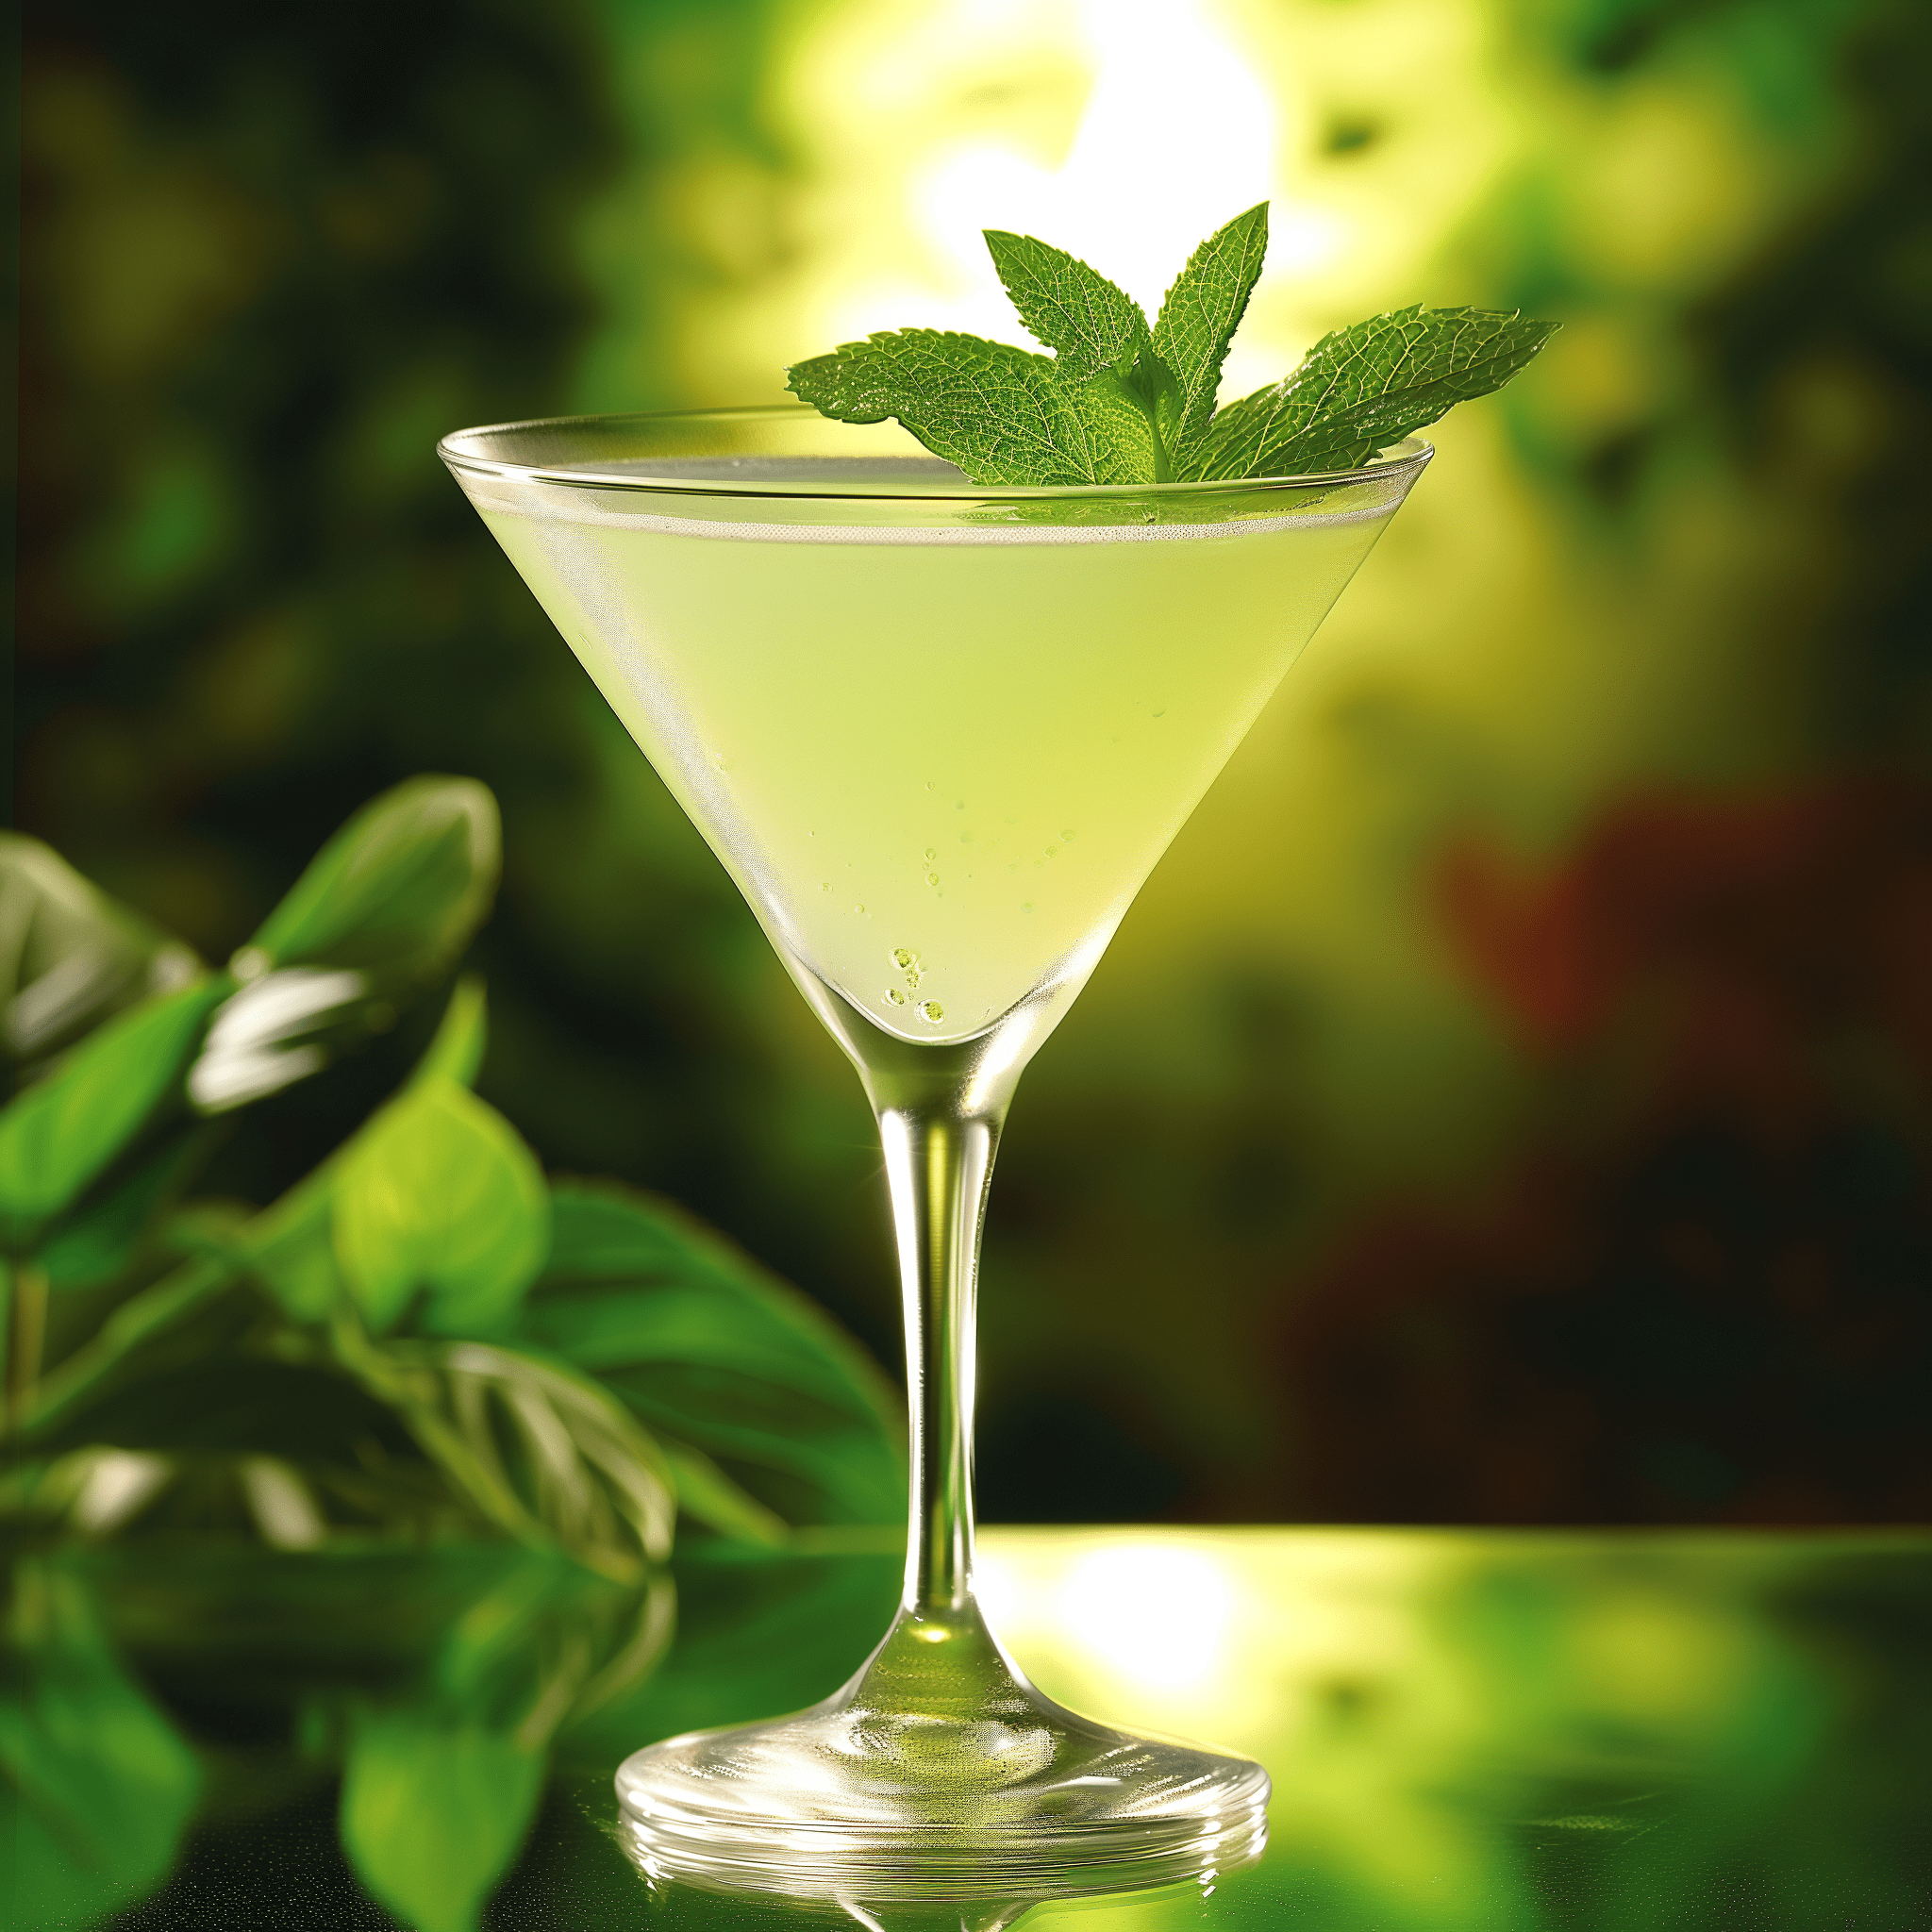 Daisy Cutter Martini Cocktail Recipe - The Daisy Cutter Martini has a delightful balance of herbal and sweet notes, with a hint of citrus and a complex botanical backdrop. It's refreshing, slightly sweet, and has a smooth finish.